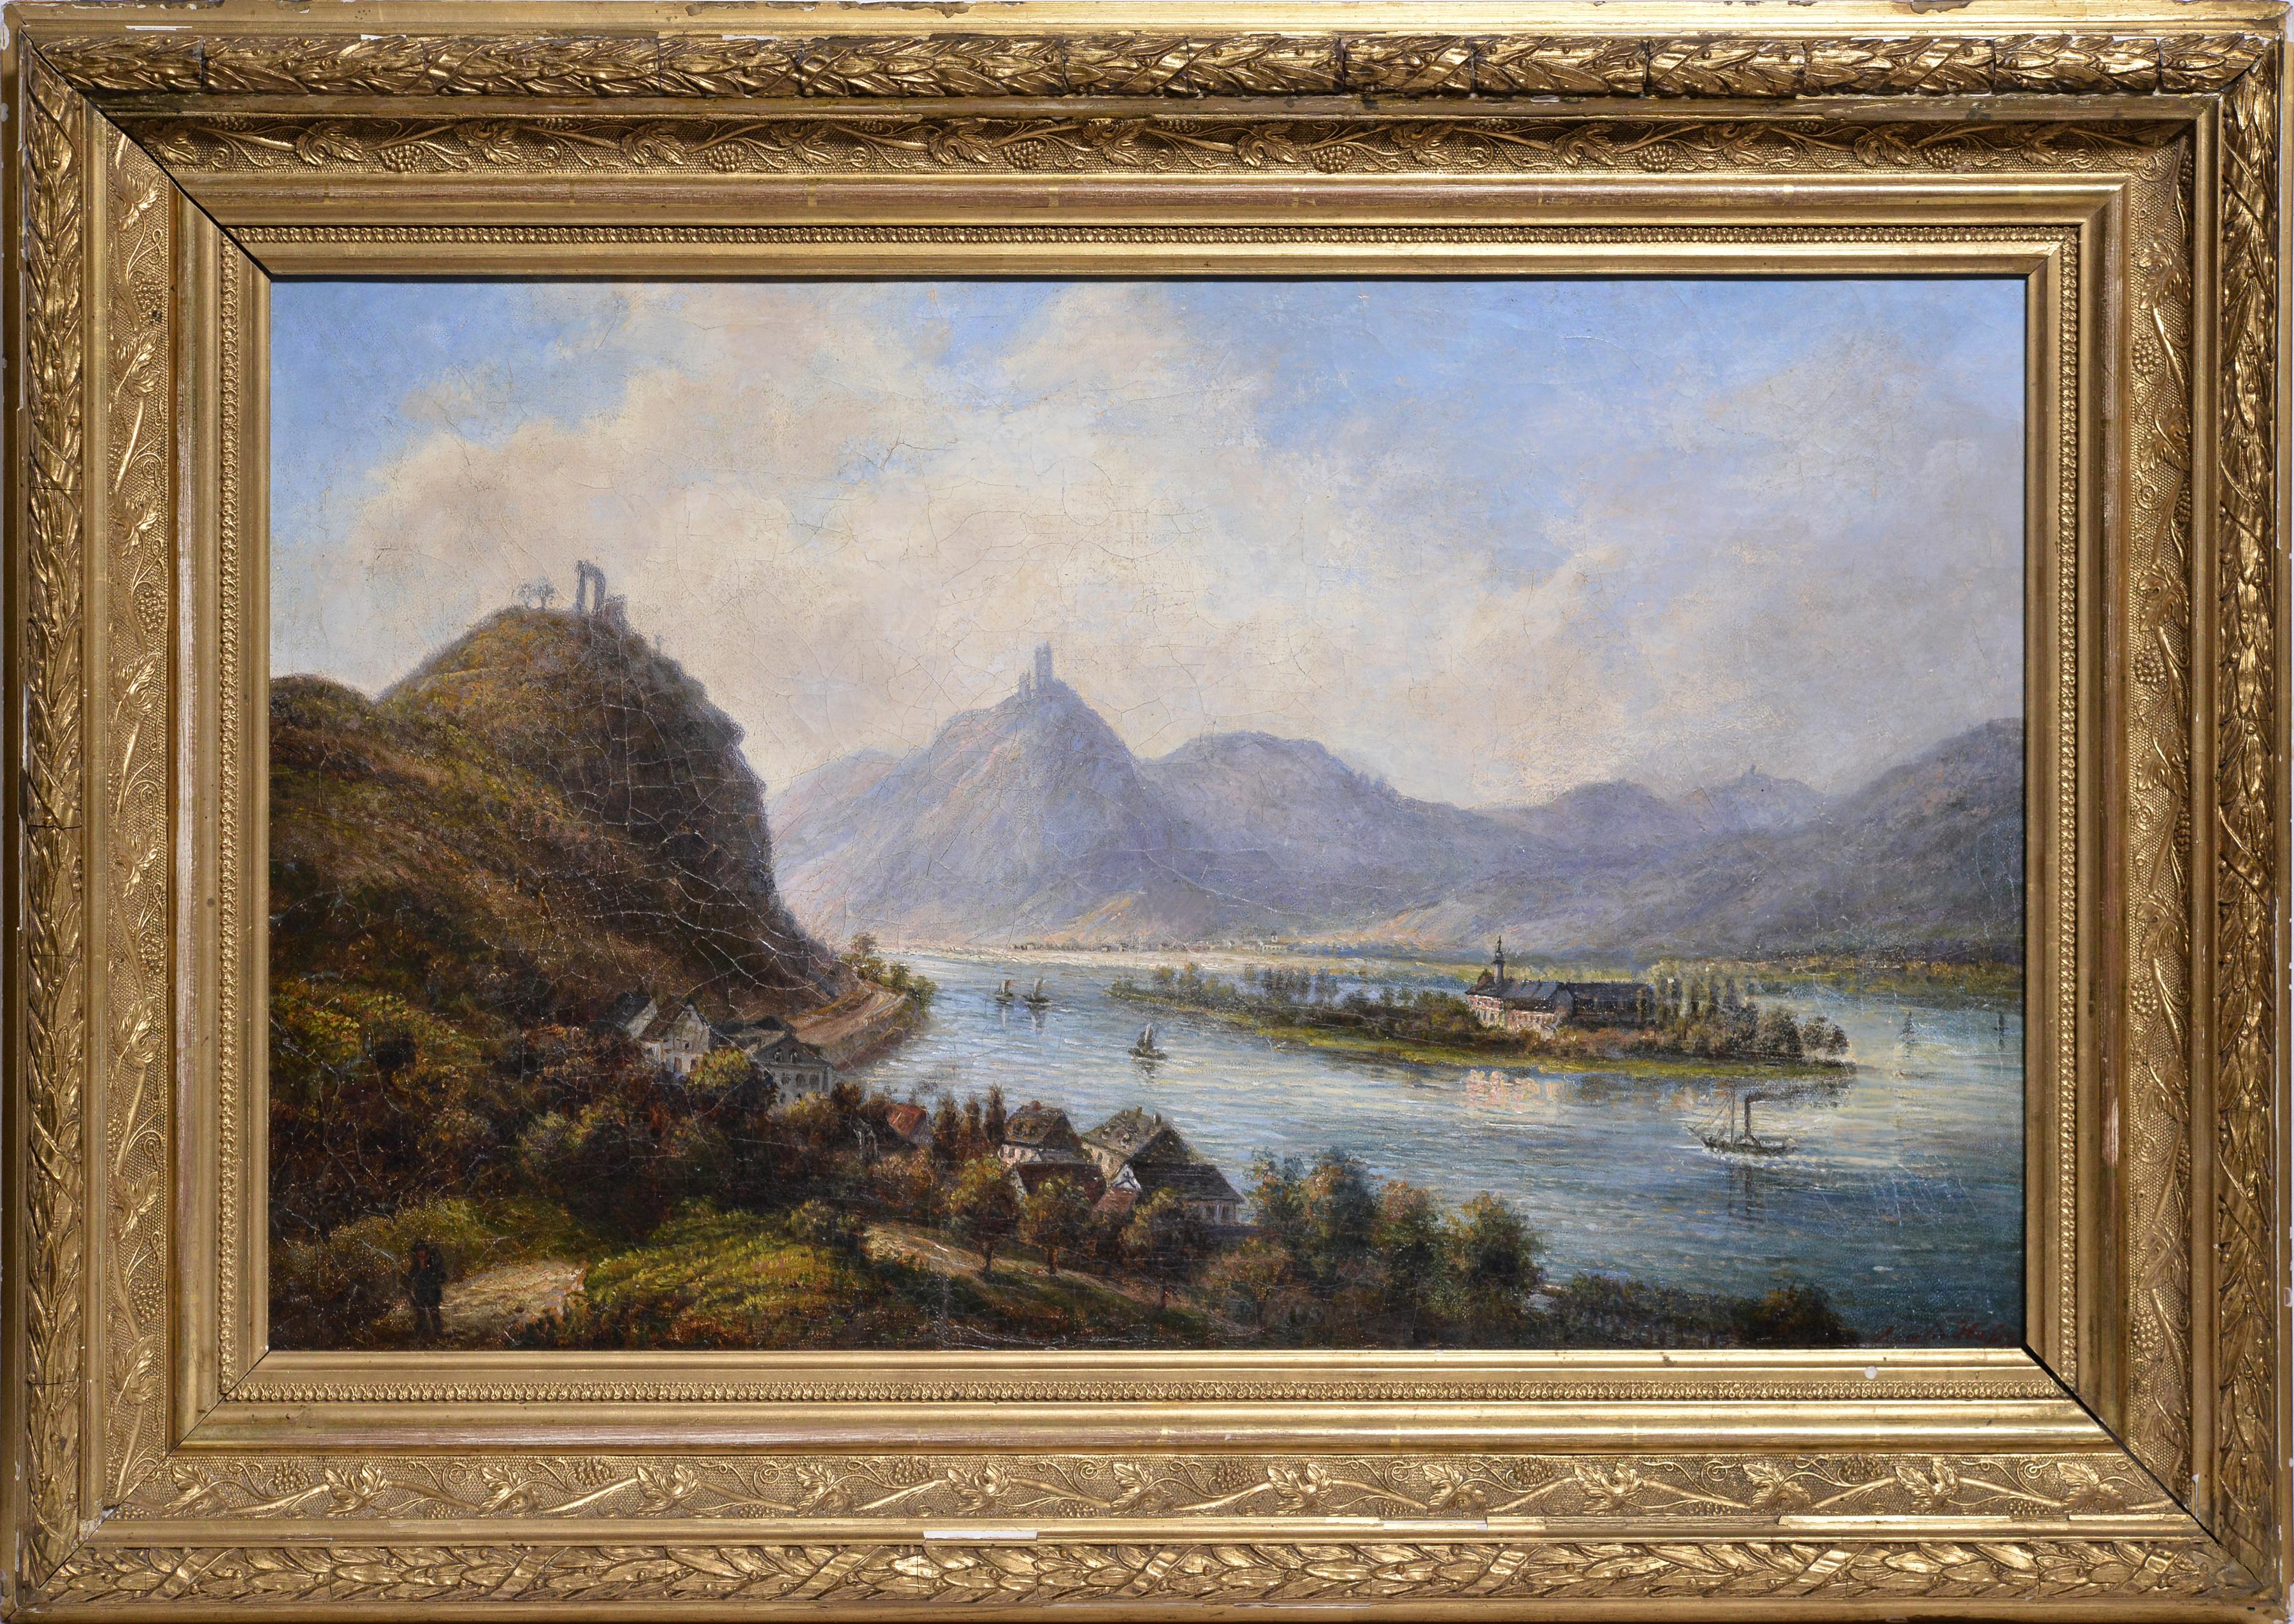 Alpine Valley Landscape with High Hills and River 19th Century Oil Painting